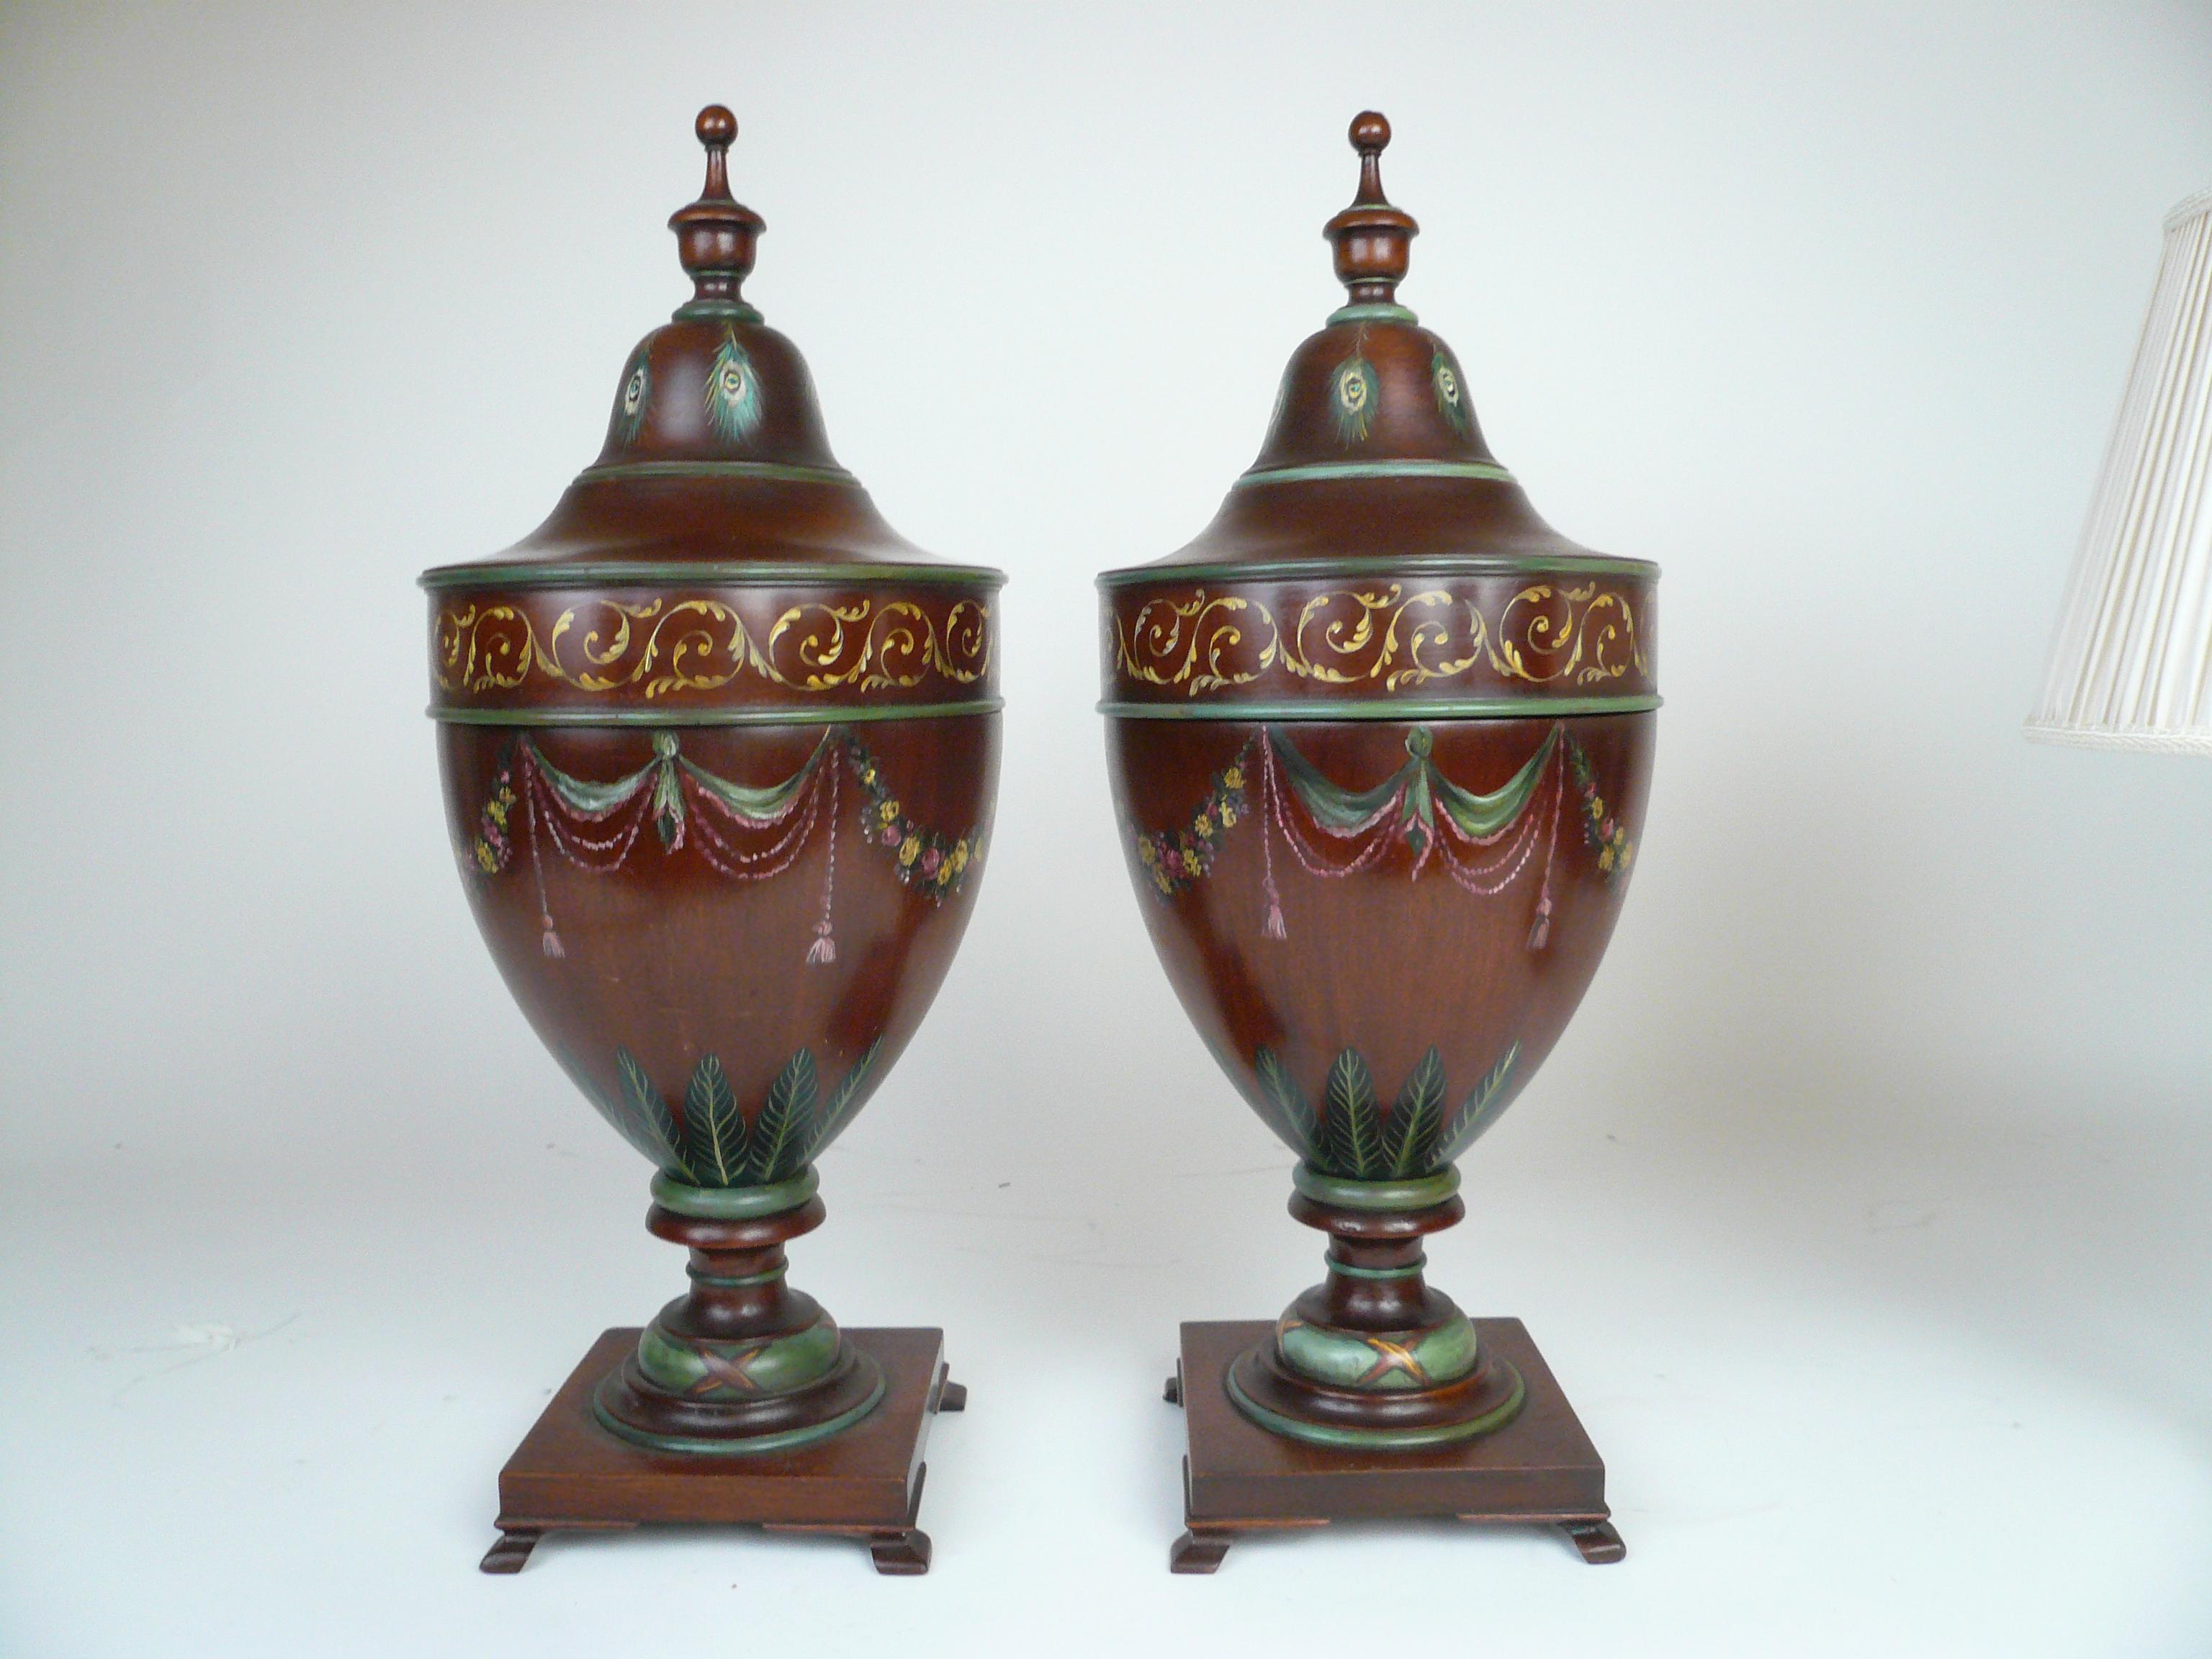 This impressive pair of urn form mahogany knife boxes in the Adam taste are hand painted with Classical motifs including floral swags and acanthus leaves.